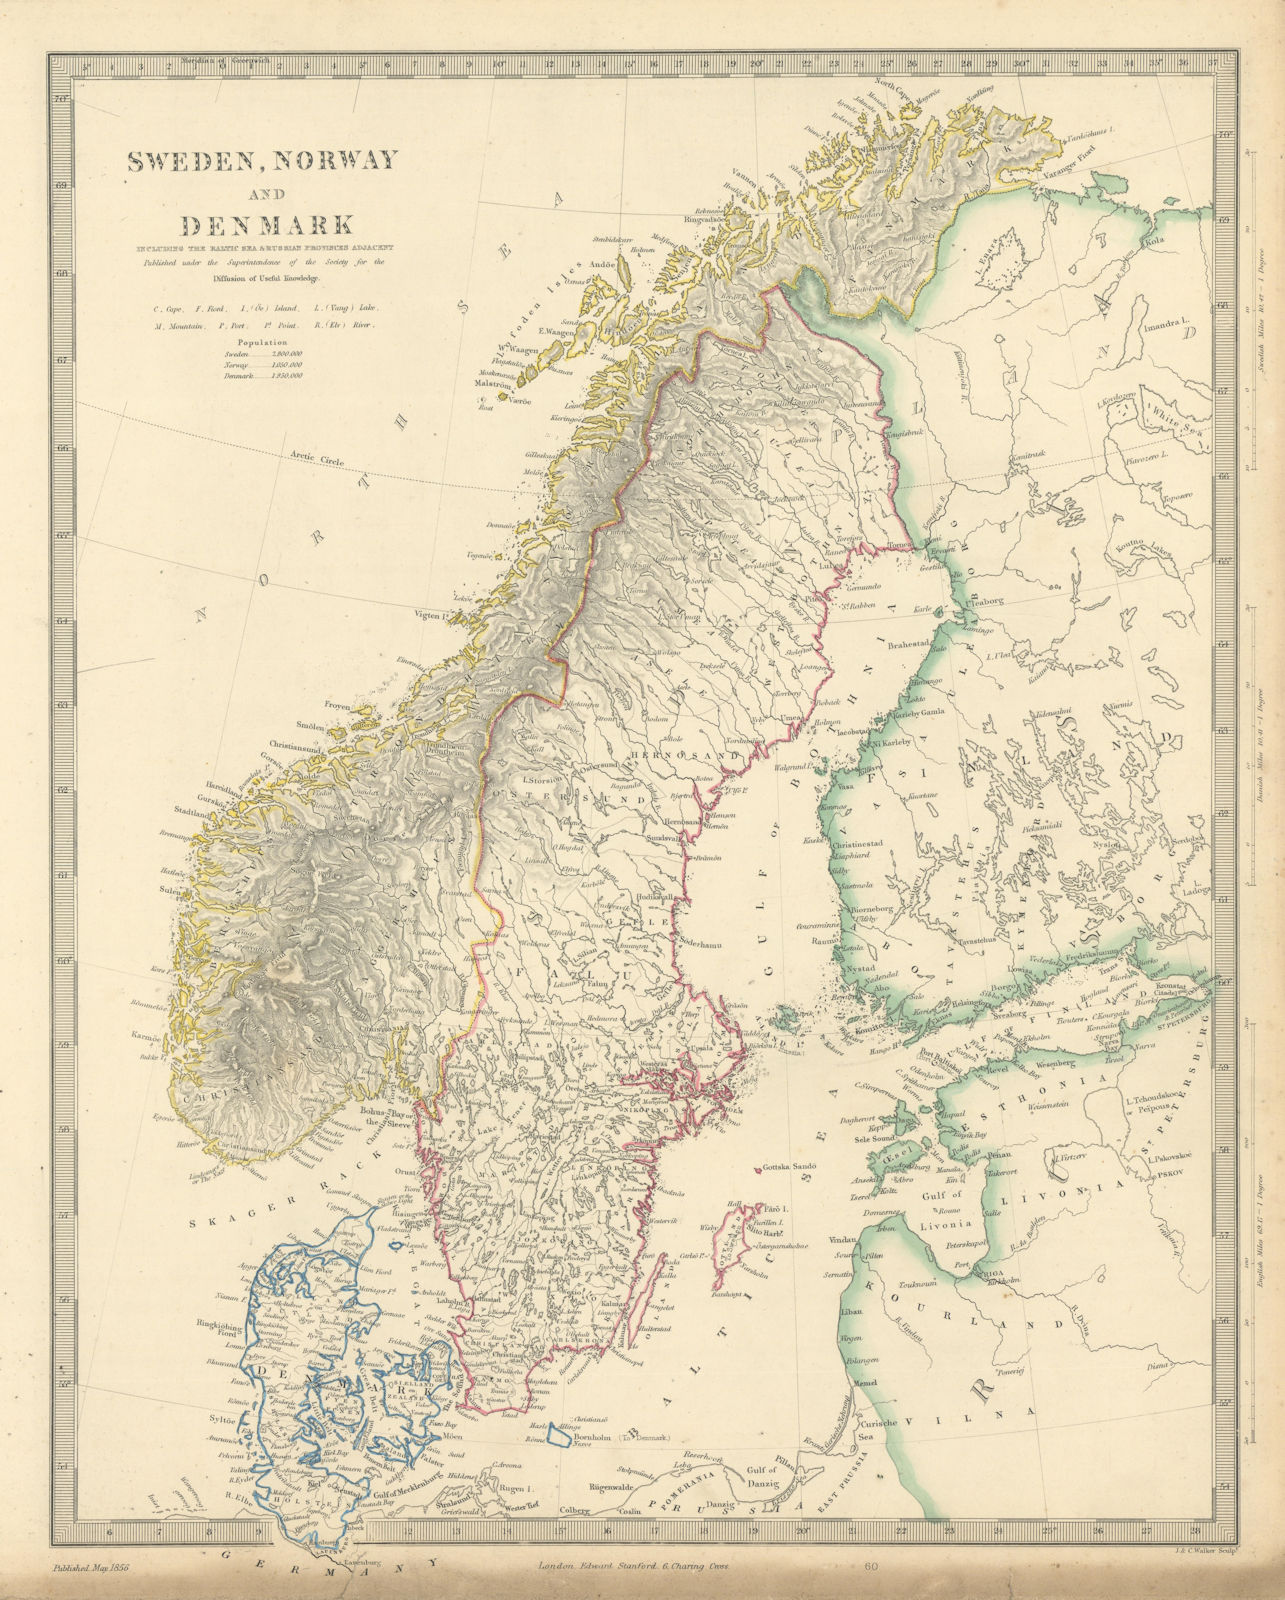 SCANDINAVIA. Sweden, Norway, and Denmark. Population table. SDUK 1856 old map